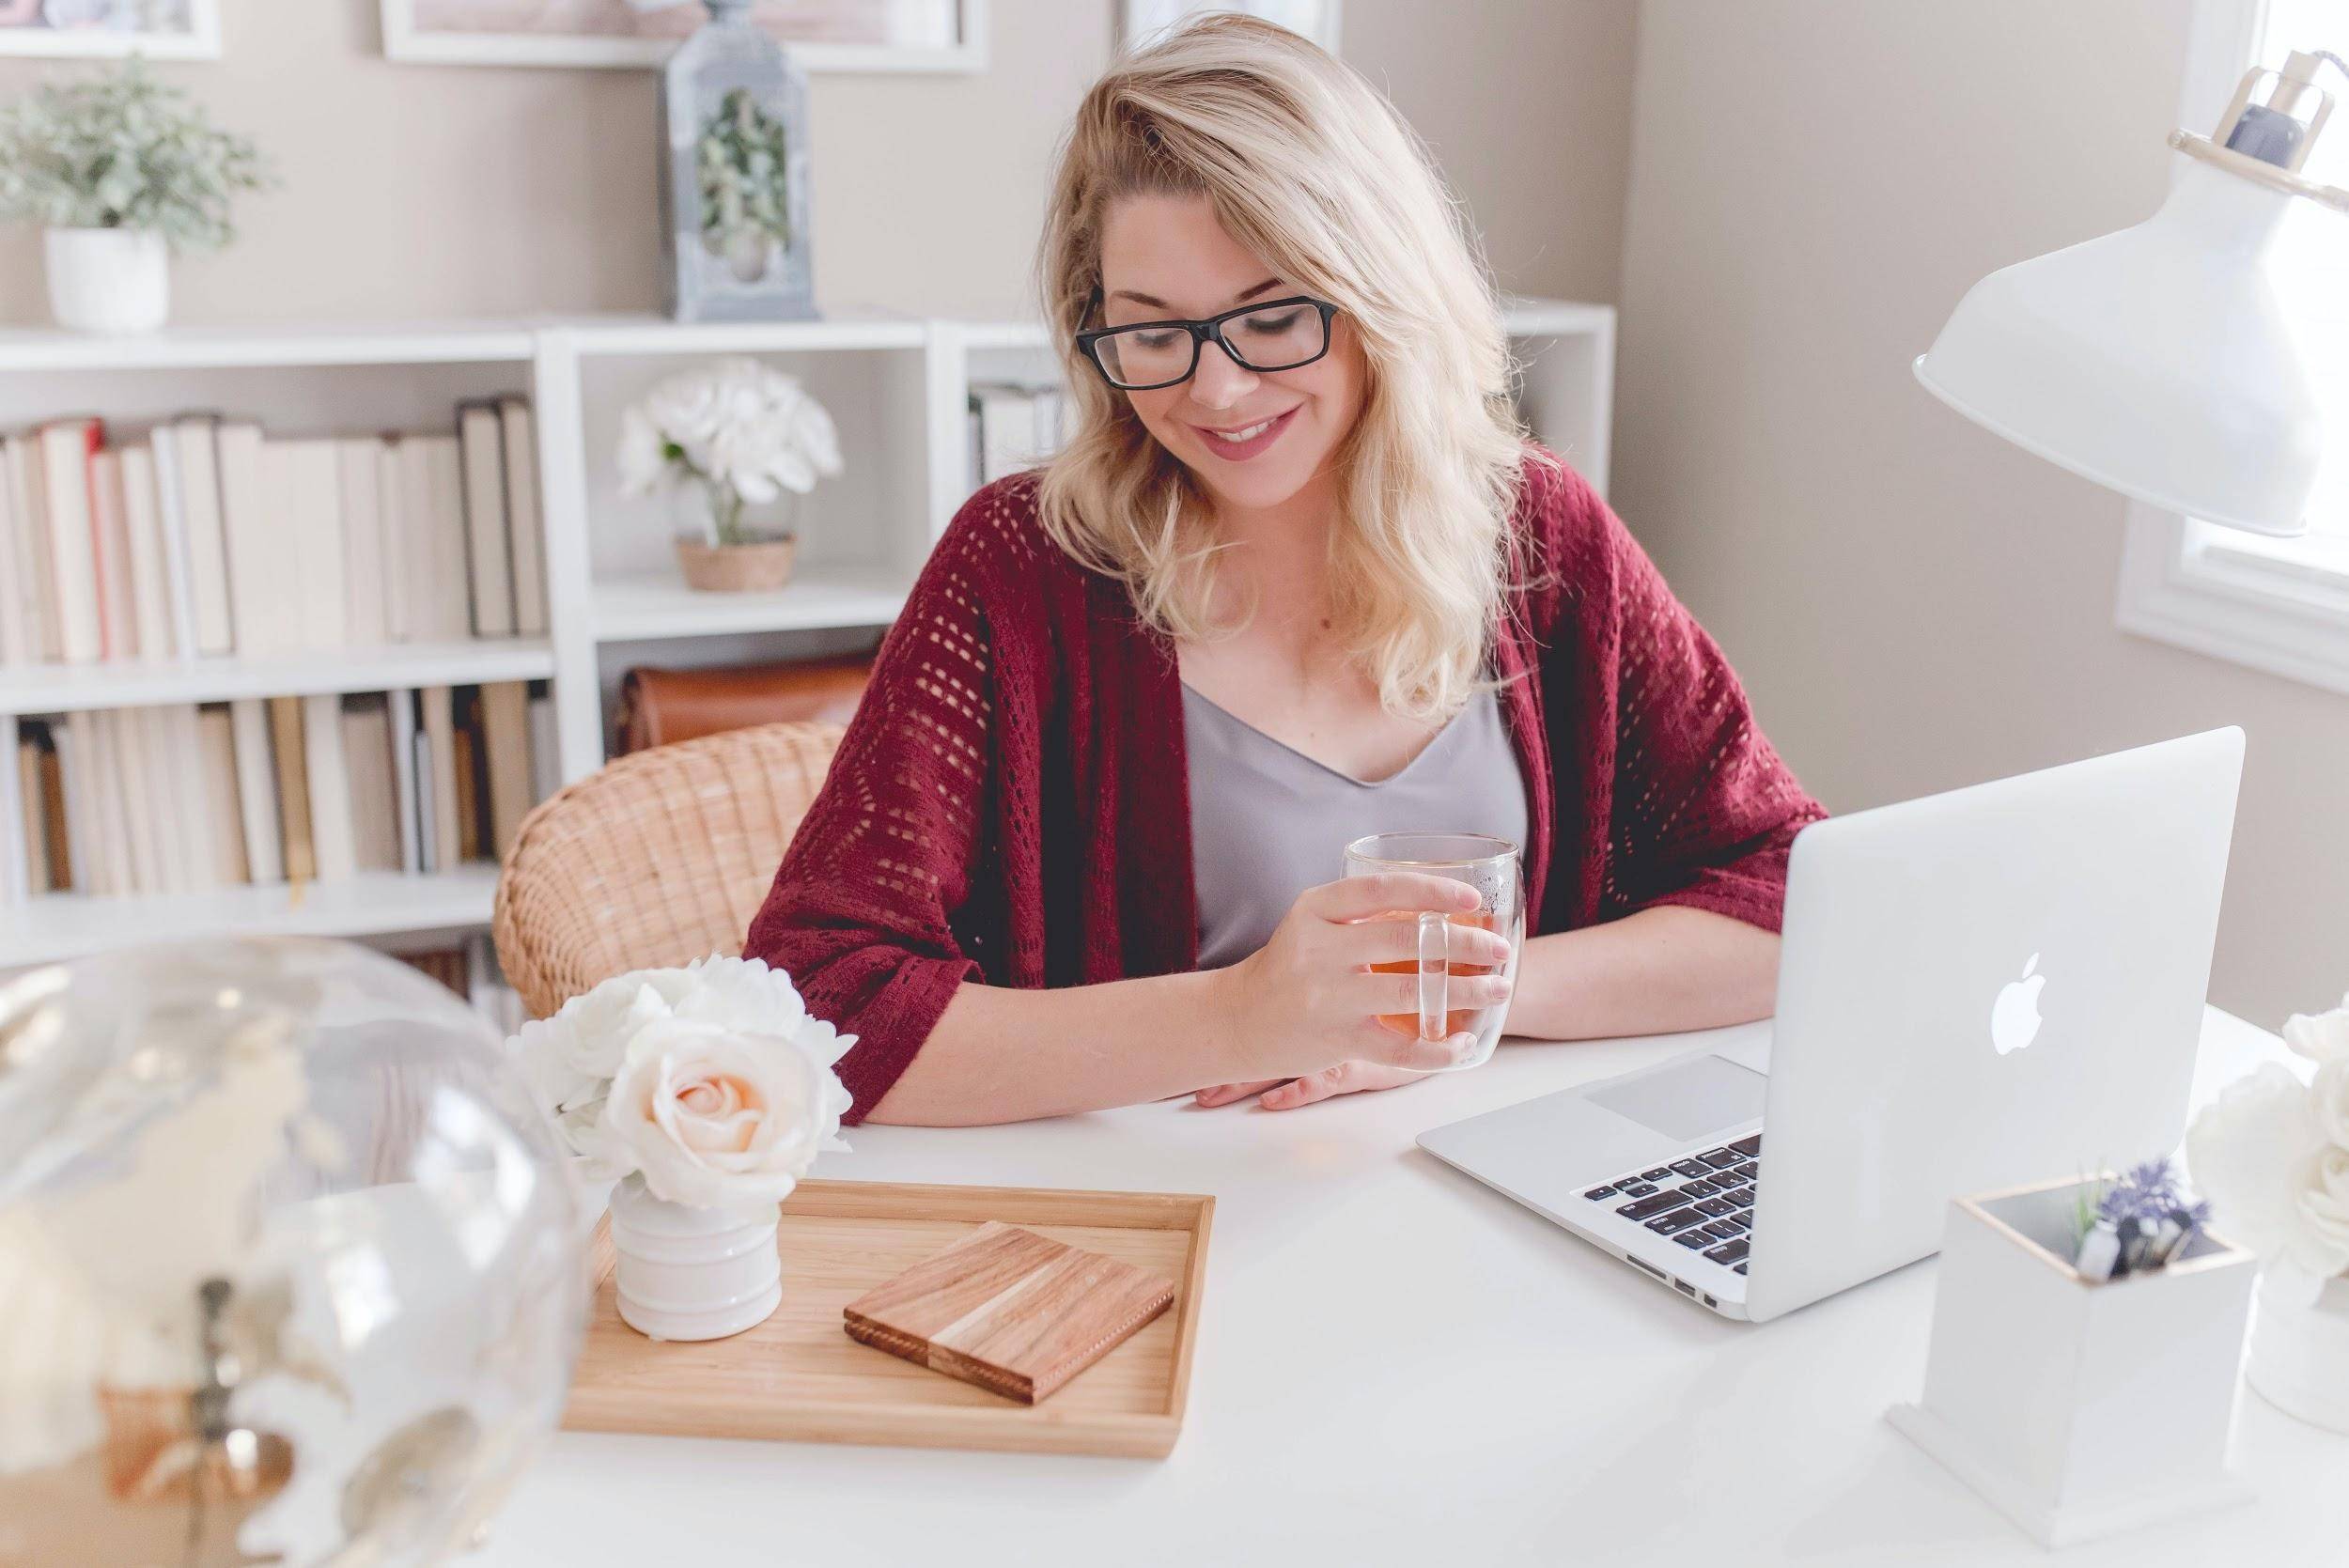 Professional women with glasses in front of a laptop in a stylish work from home office